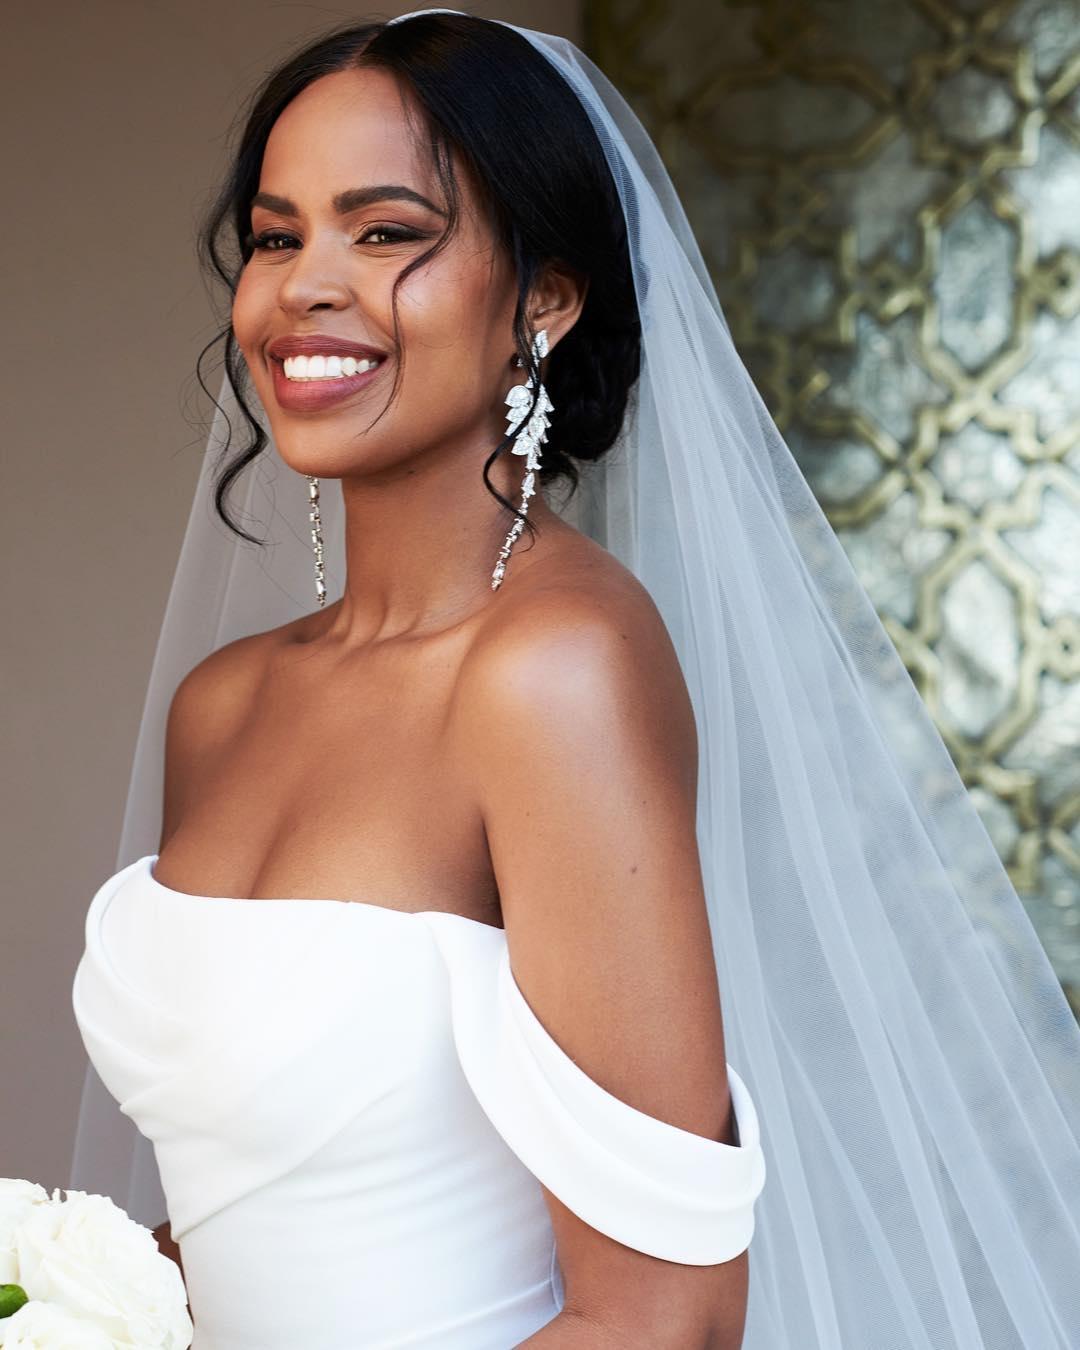 Idris Elba's Wedding to Sabrina Dhowre in Morocco - Wedding Story and Pictures